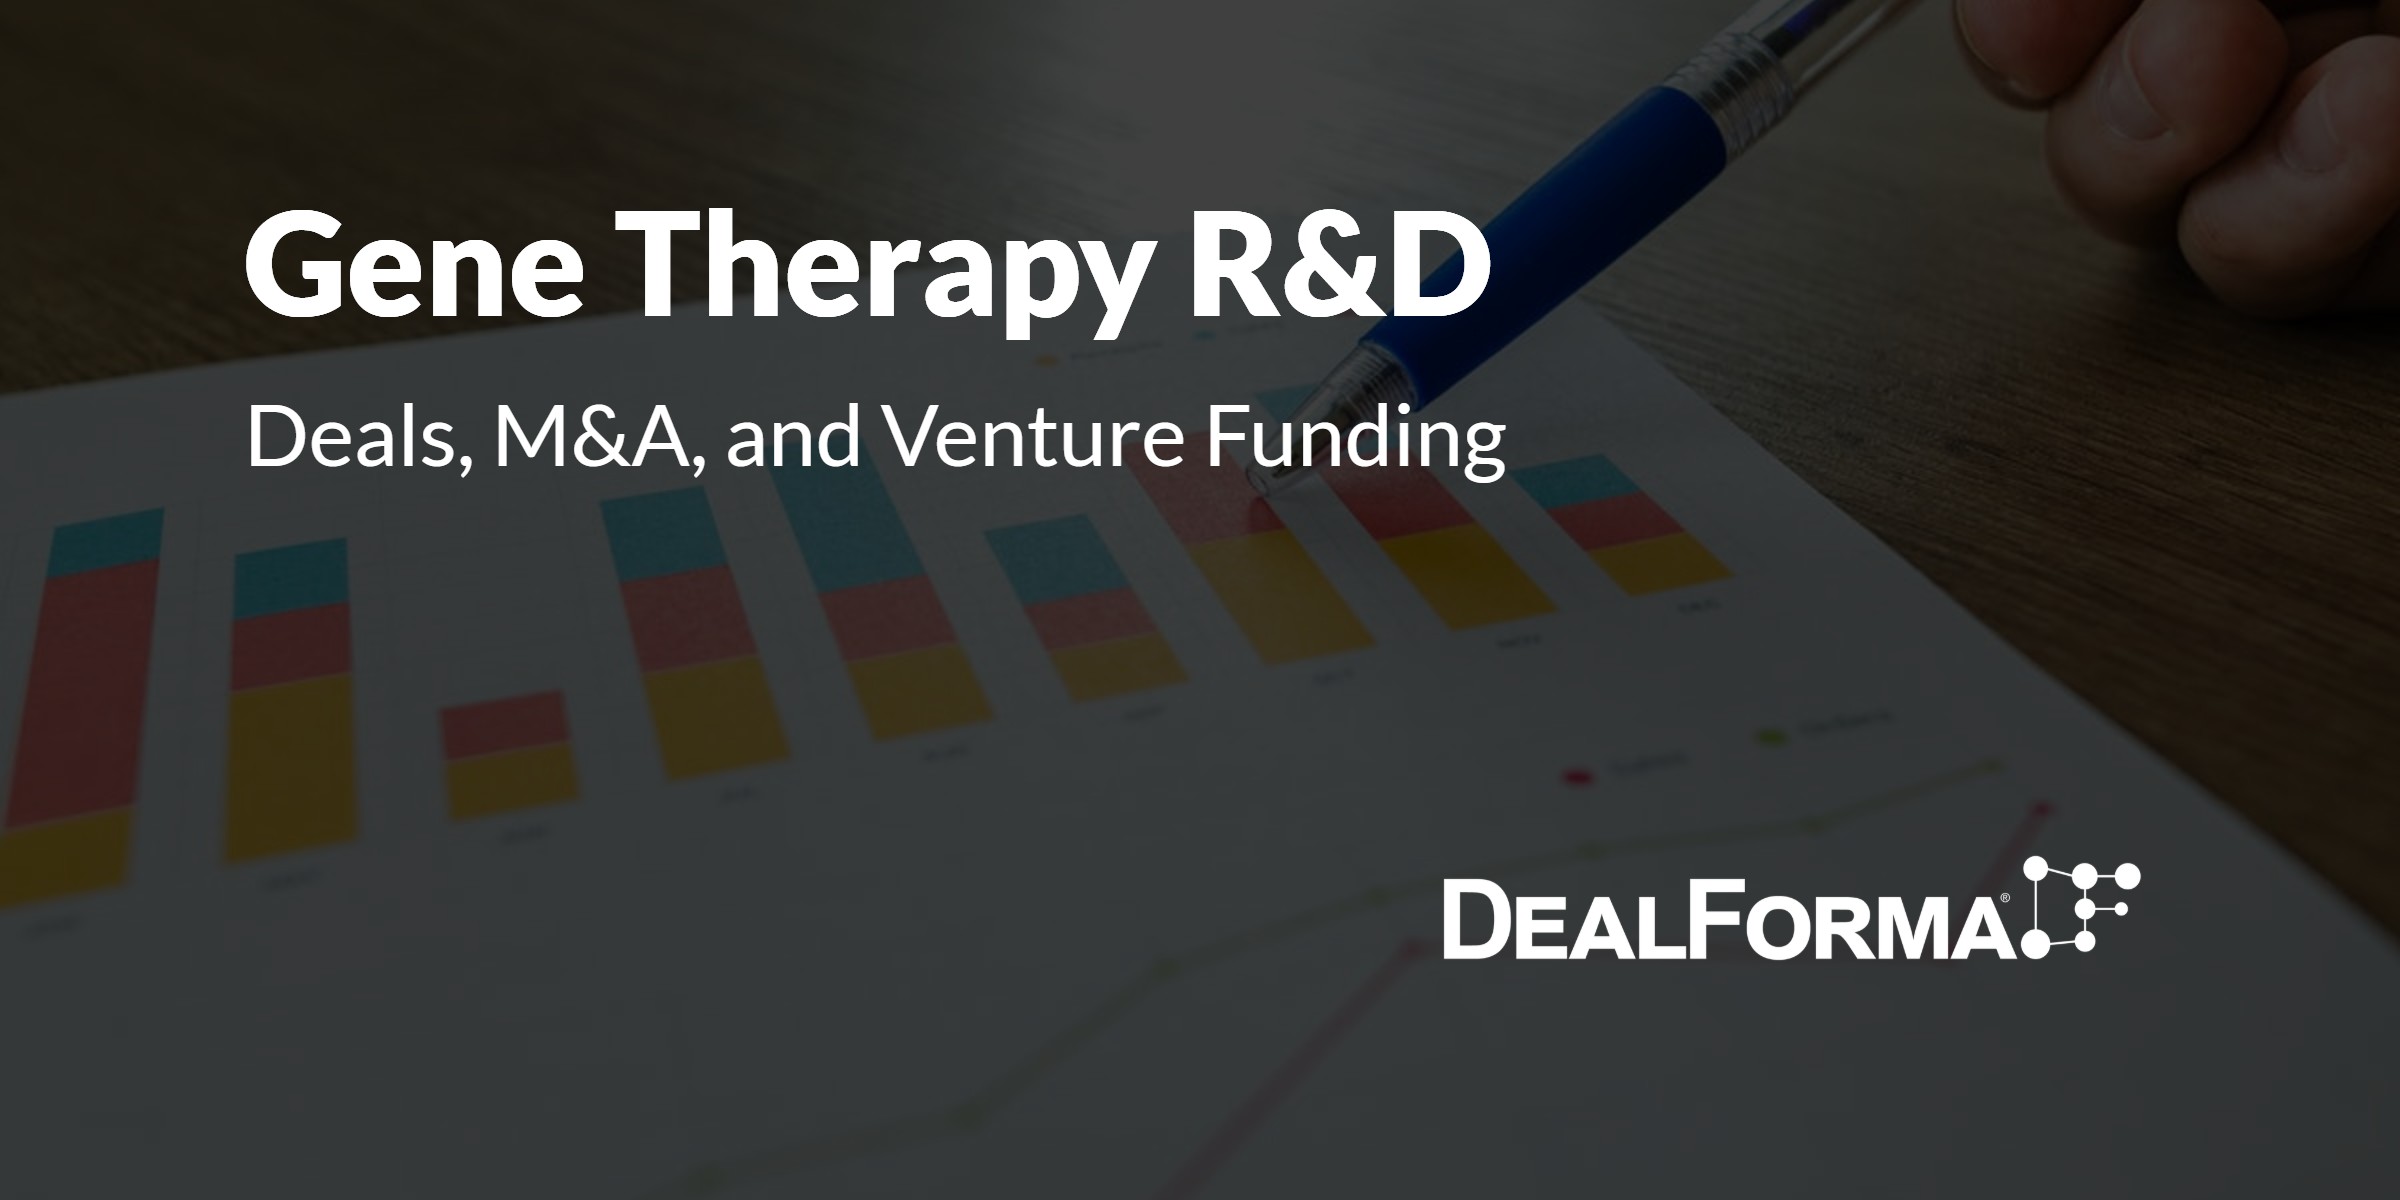 Gene Therapy Deals, M&A, Academic Partnerships, and Venture Funding